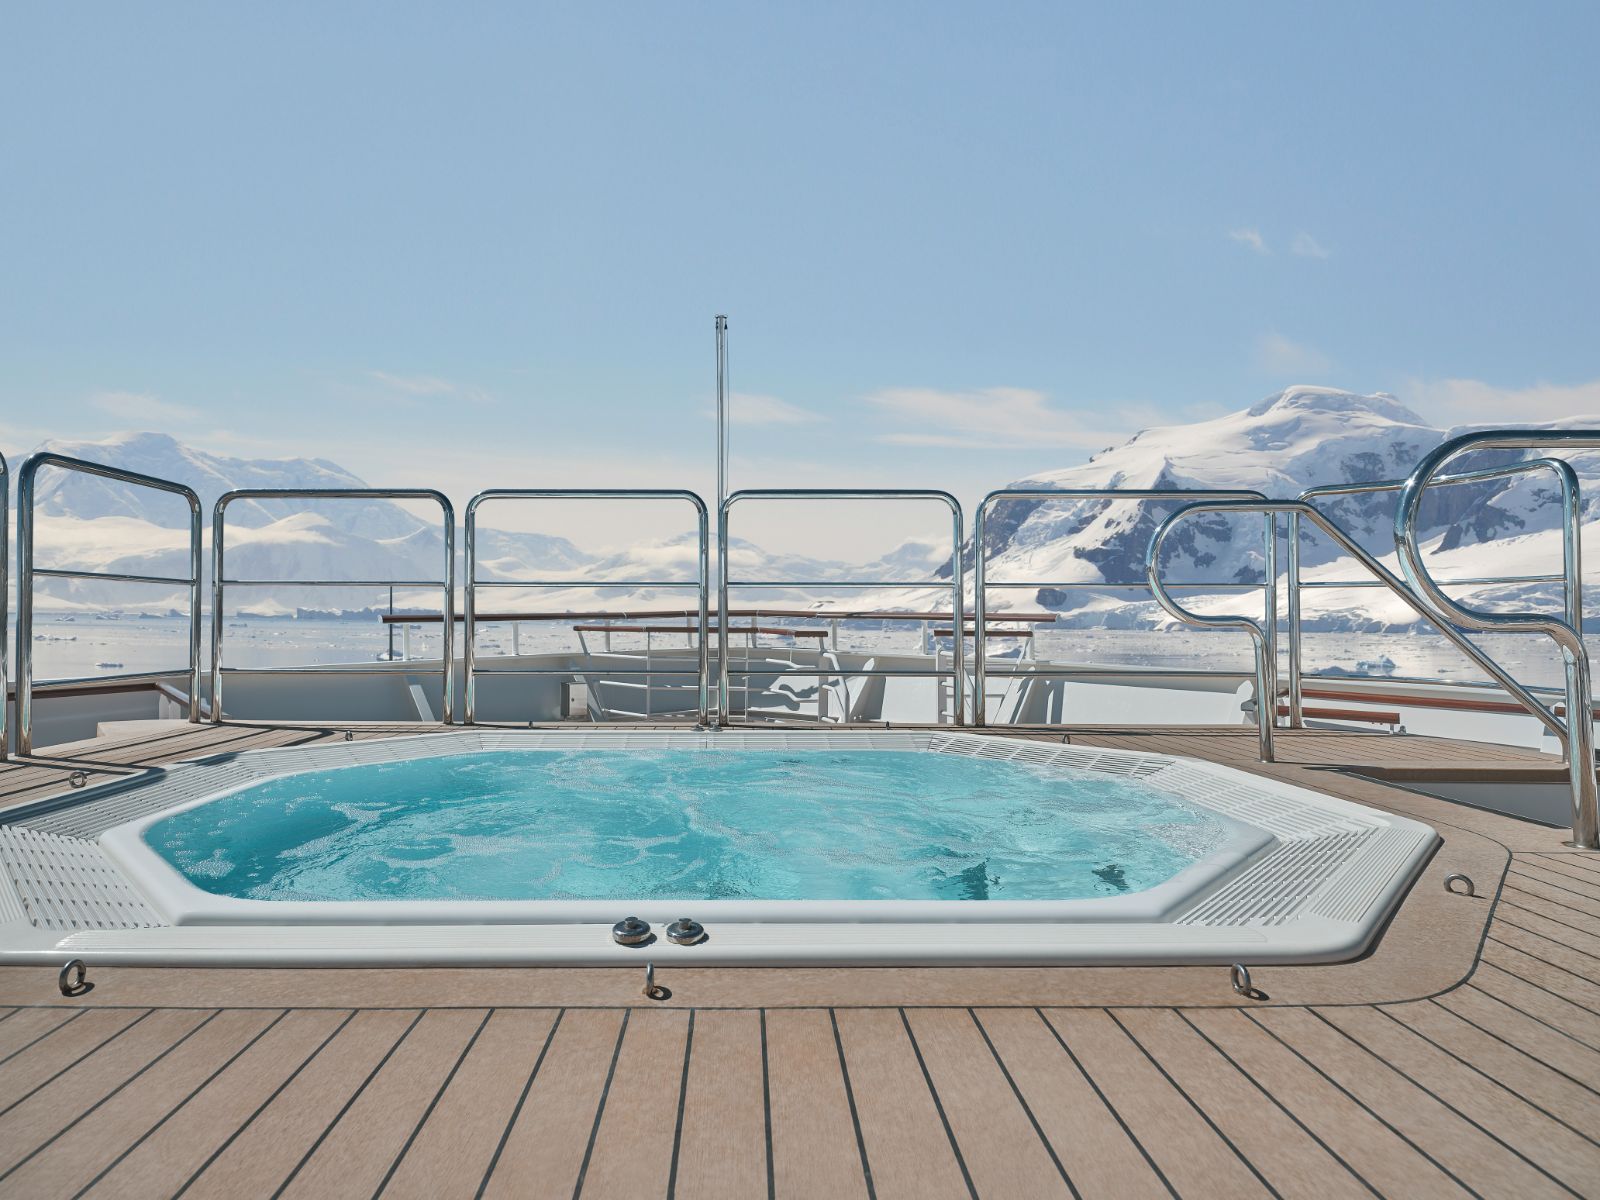 Hot tub on the deck of the Silver Endeavour luxury cruise liner